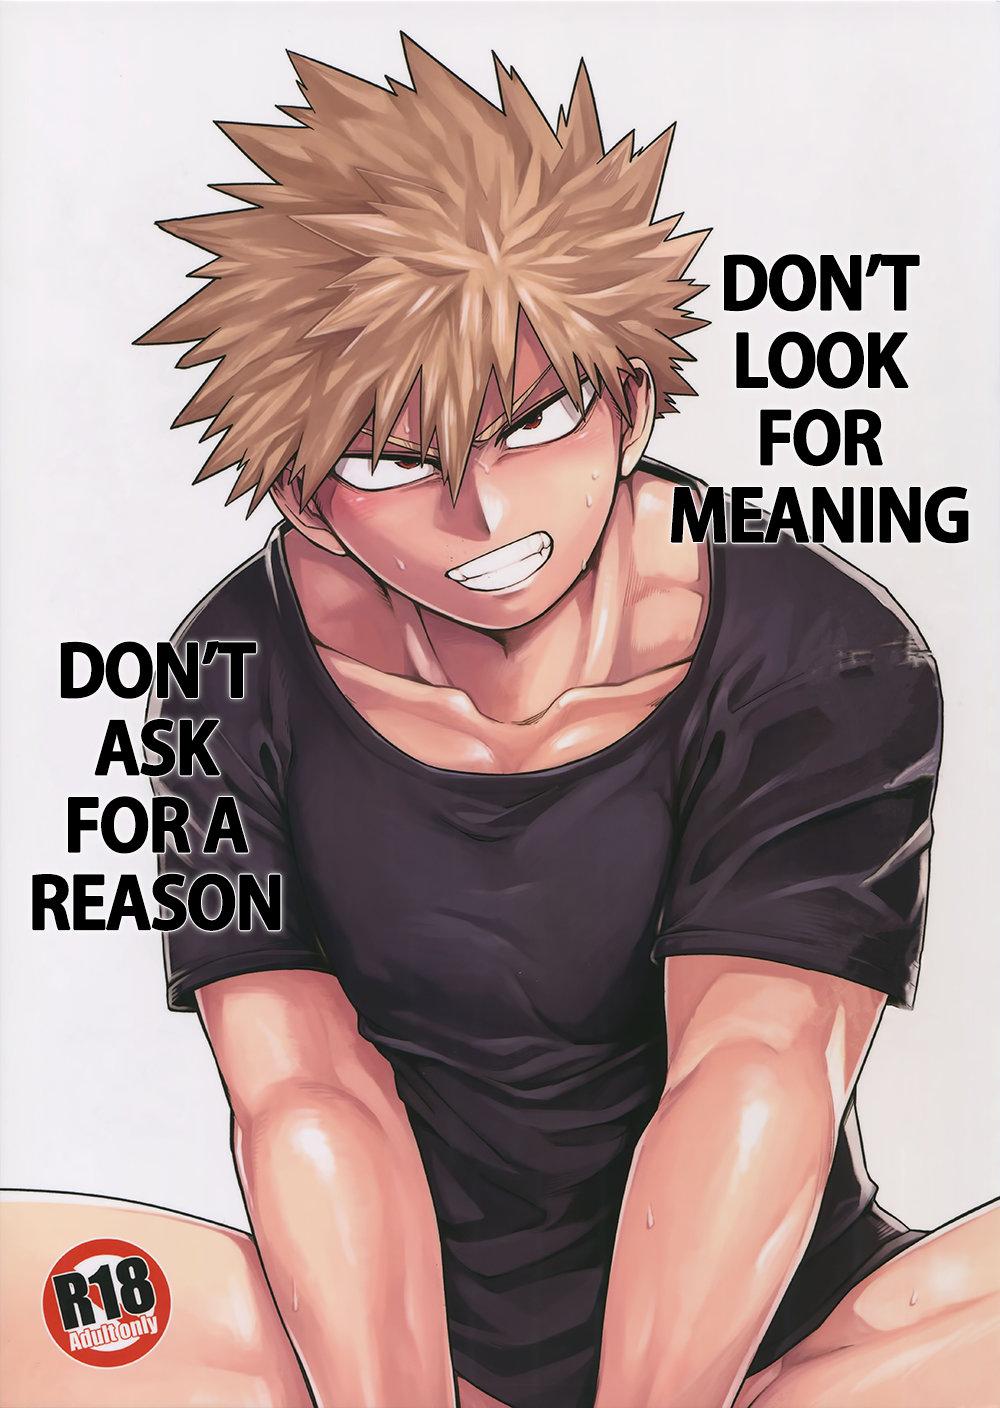 Russian Imi o Sasuna Riyuu o Touna | Don't Look for Meaning, Don't Ask for a Reason - My hero academia Lover - Picture 1